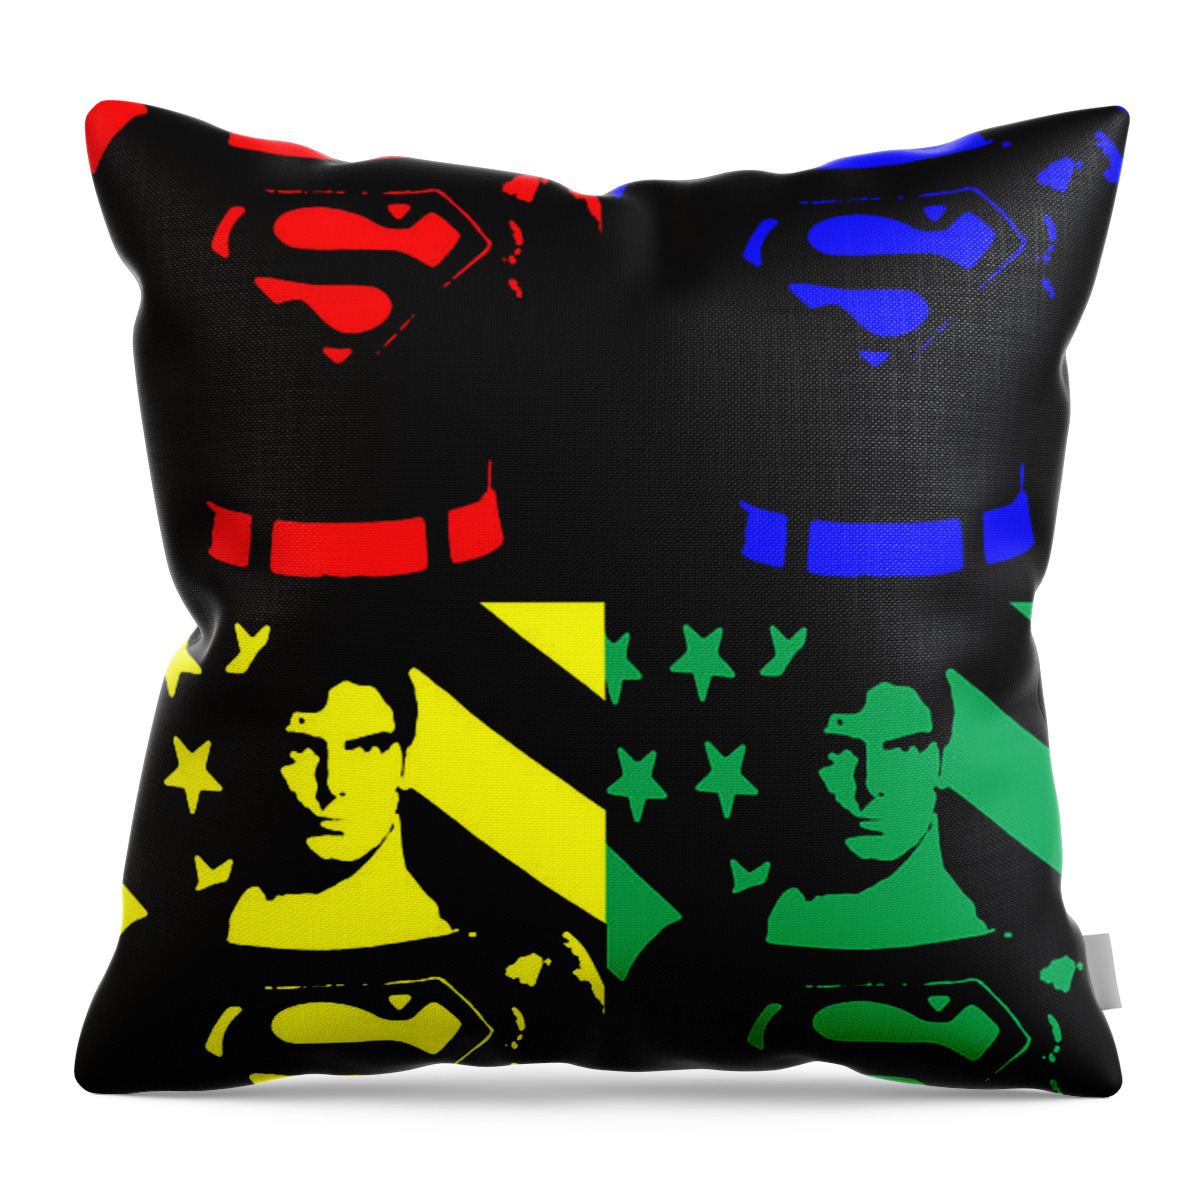 Comics Throw Pillow featuring the digital art Our Man Of Steel by Saad Hasnain